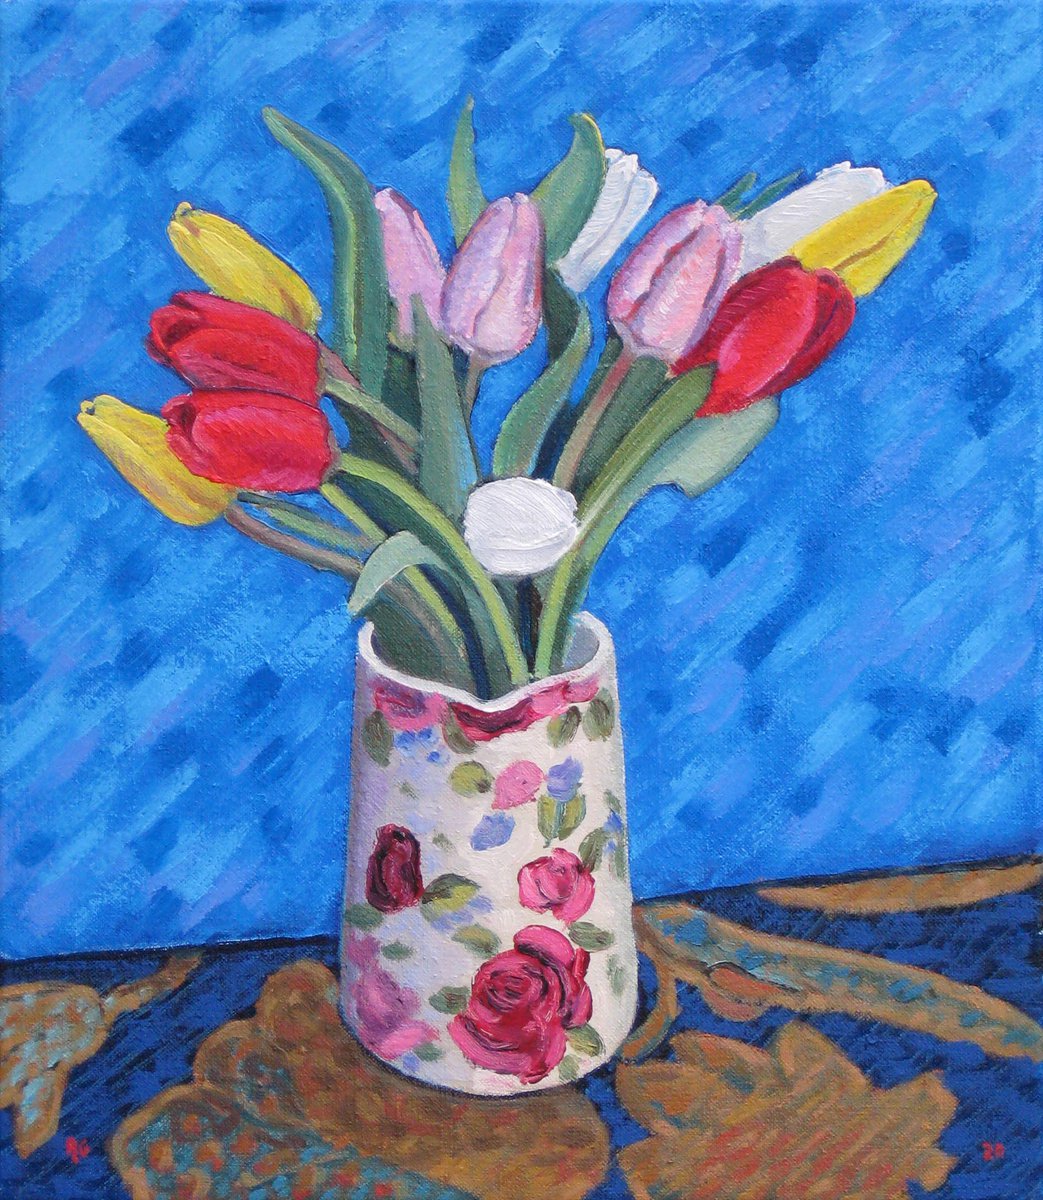 Tulips in a Jug by Richard Gibson